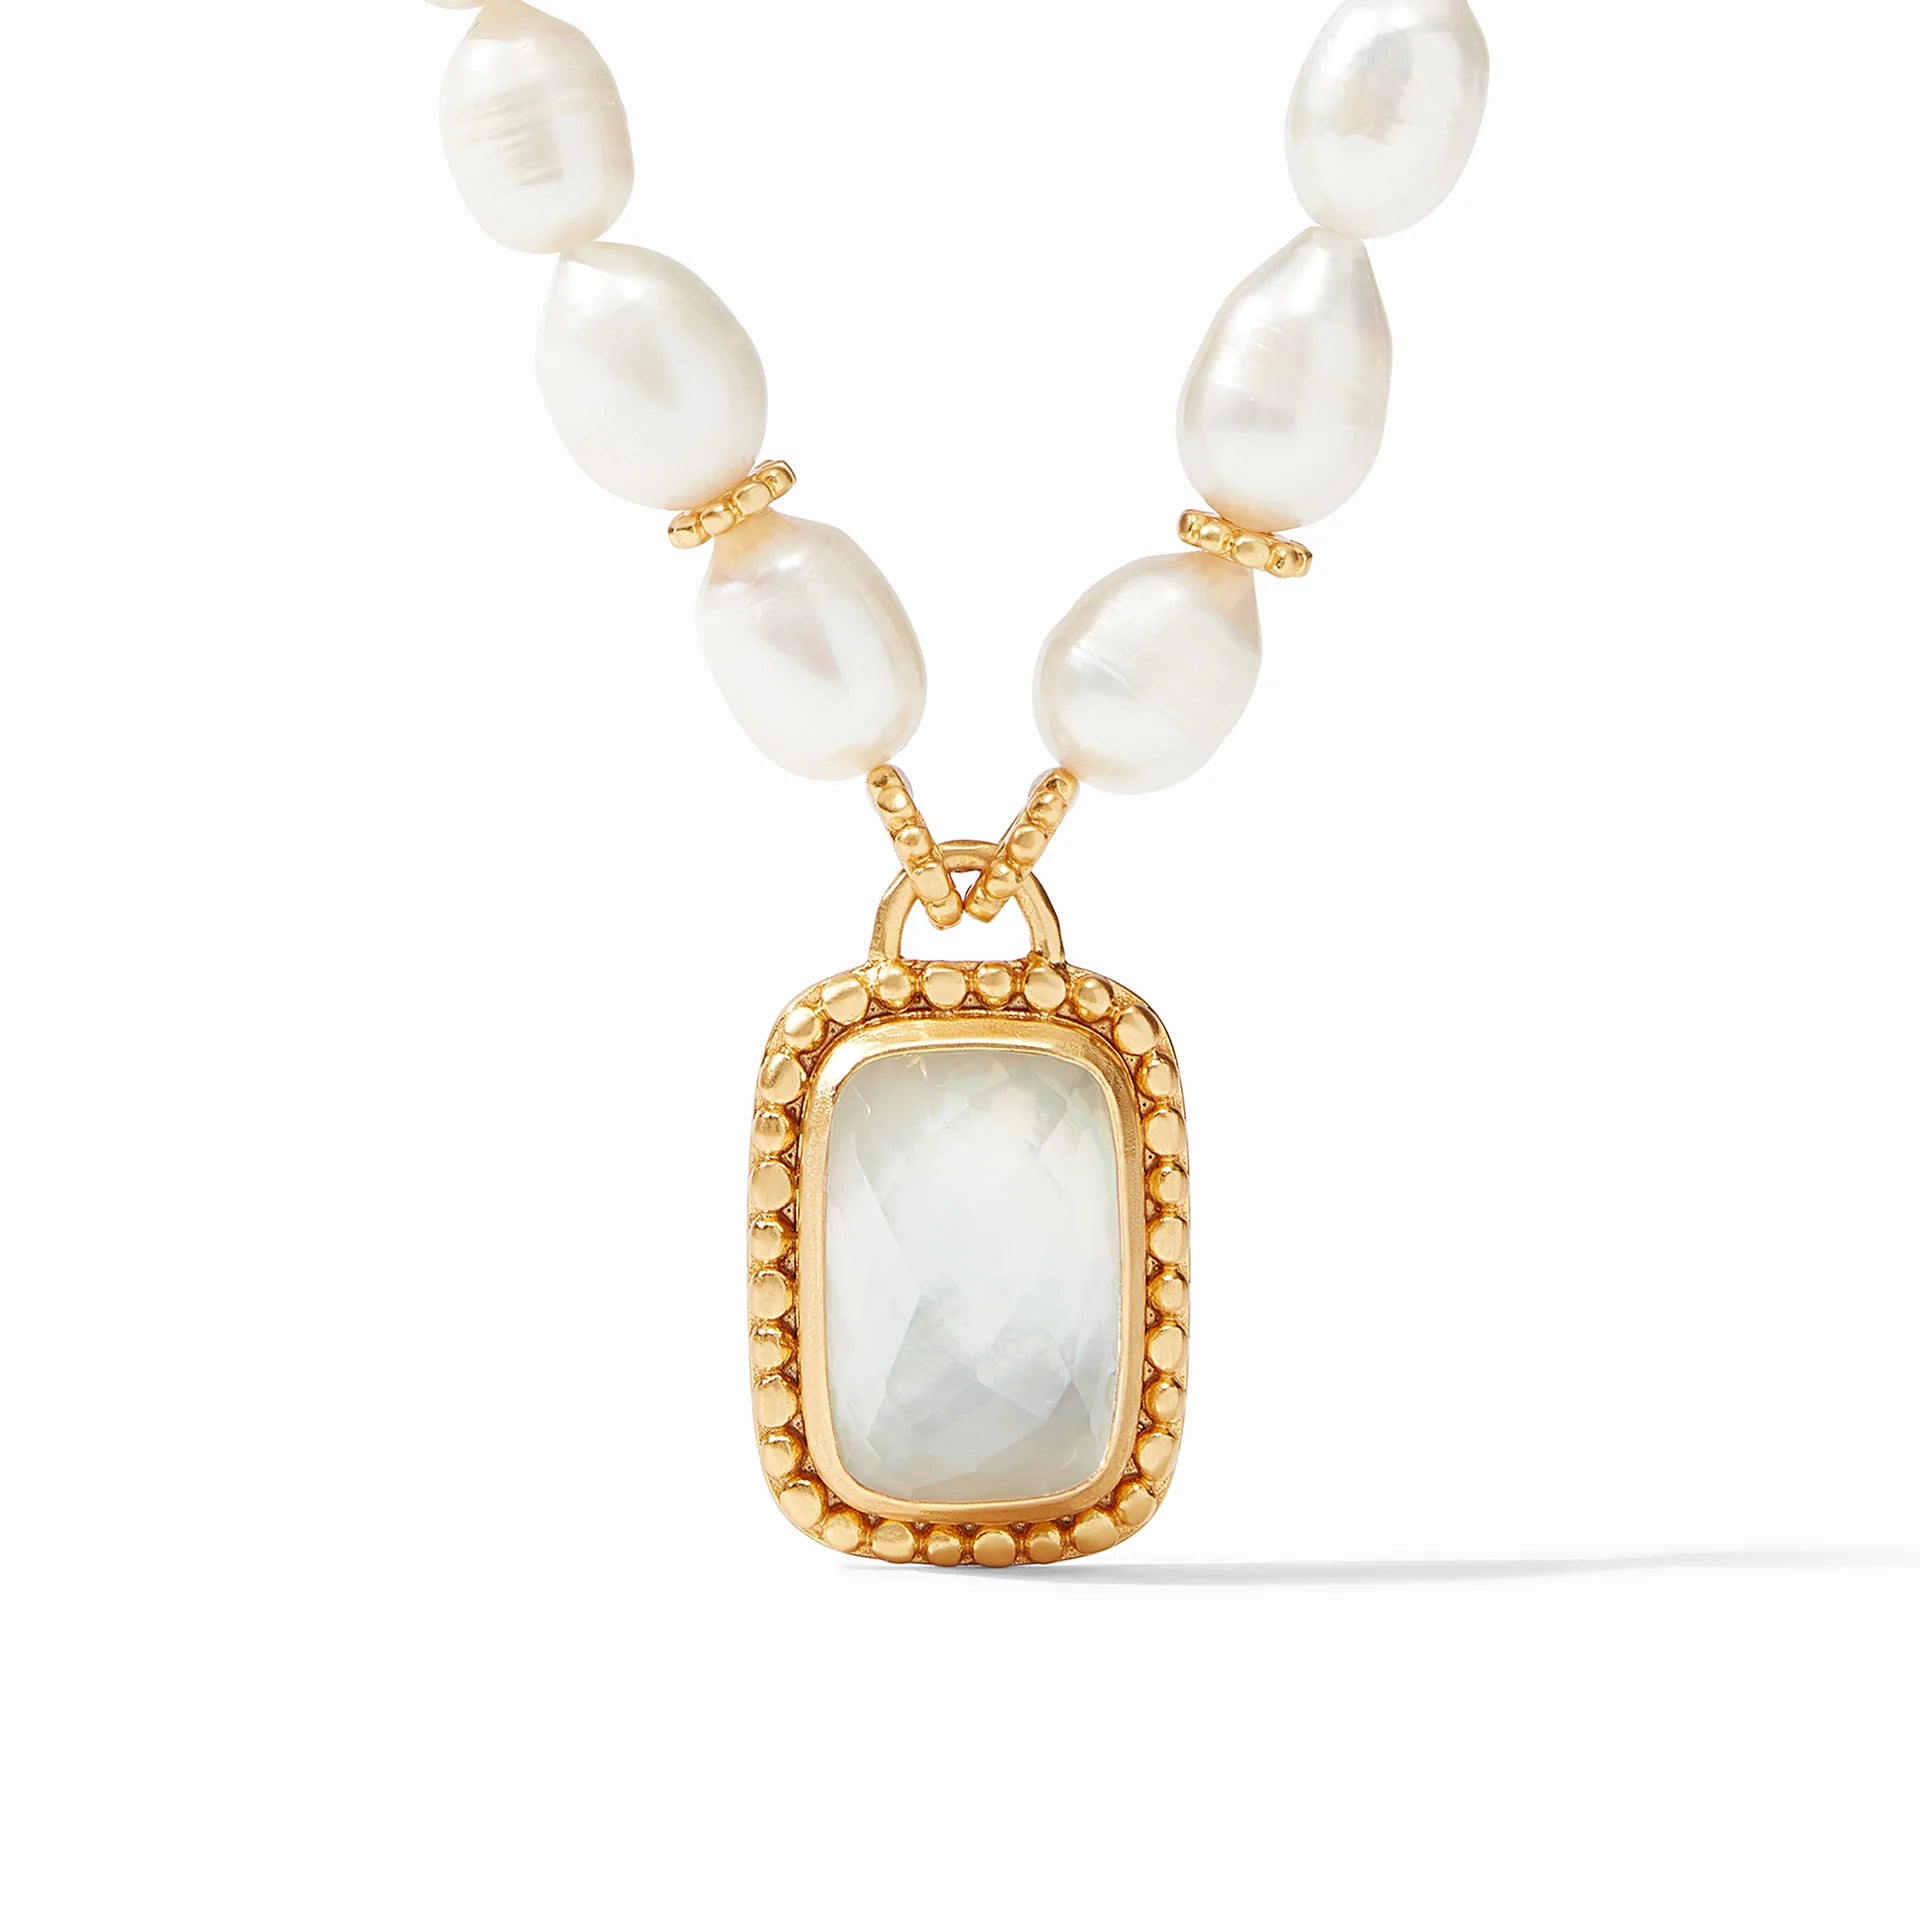 MARBELLA STATEMENT NECKLACE GOLD IRIDESCENT CLEAR CRYSTAL AND FRESHWATER PEARL